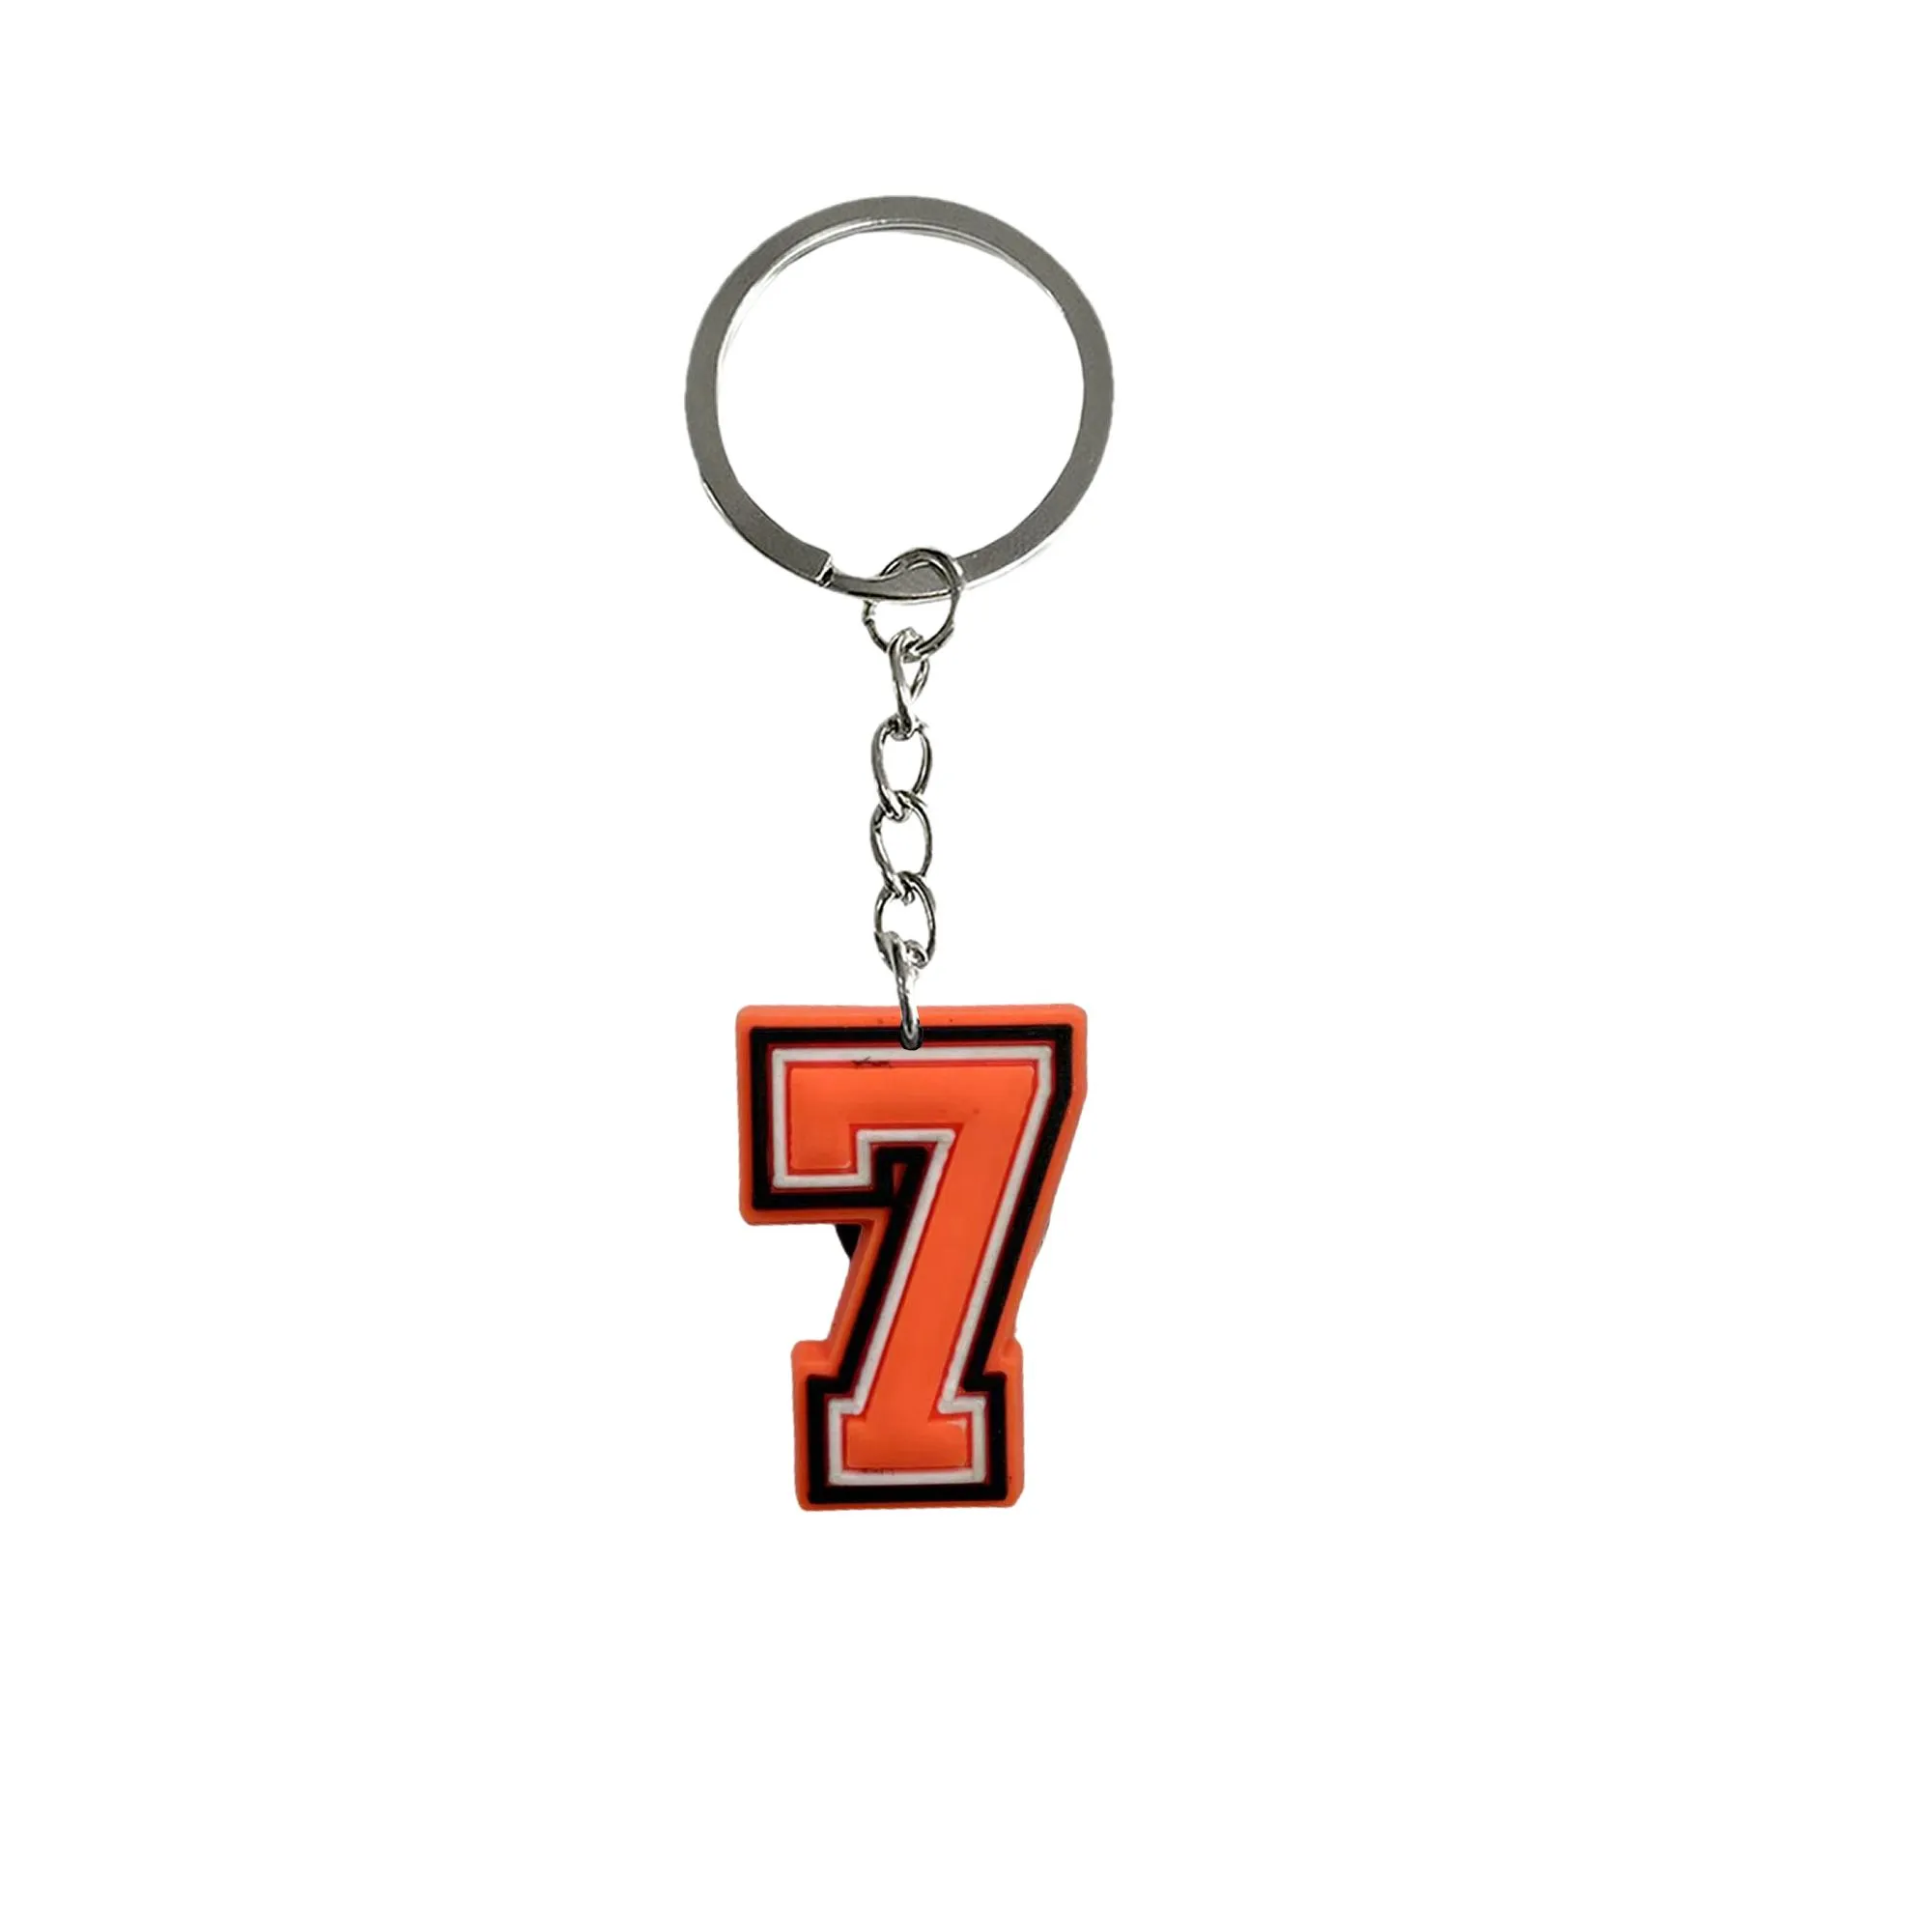 orange number 11 keychain keychains tags goodie bag stuffer christmas gifts and holiday charms for men birthday party favors gift keyring suitable schoolbag key pendant accessories bags chain backpack handbag car valentines day keyrings